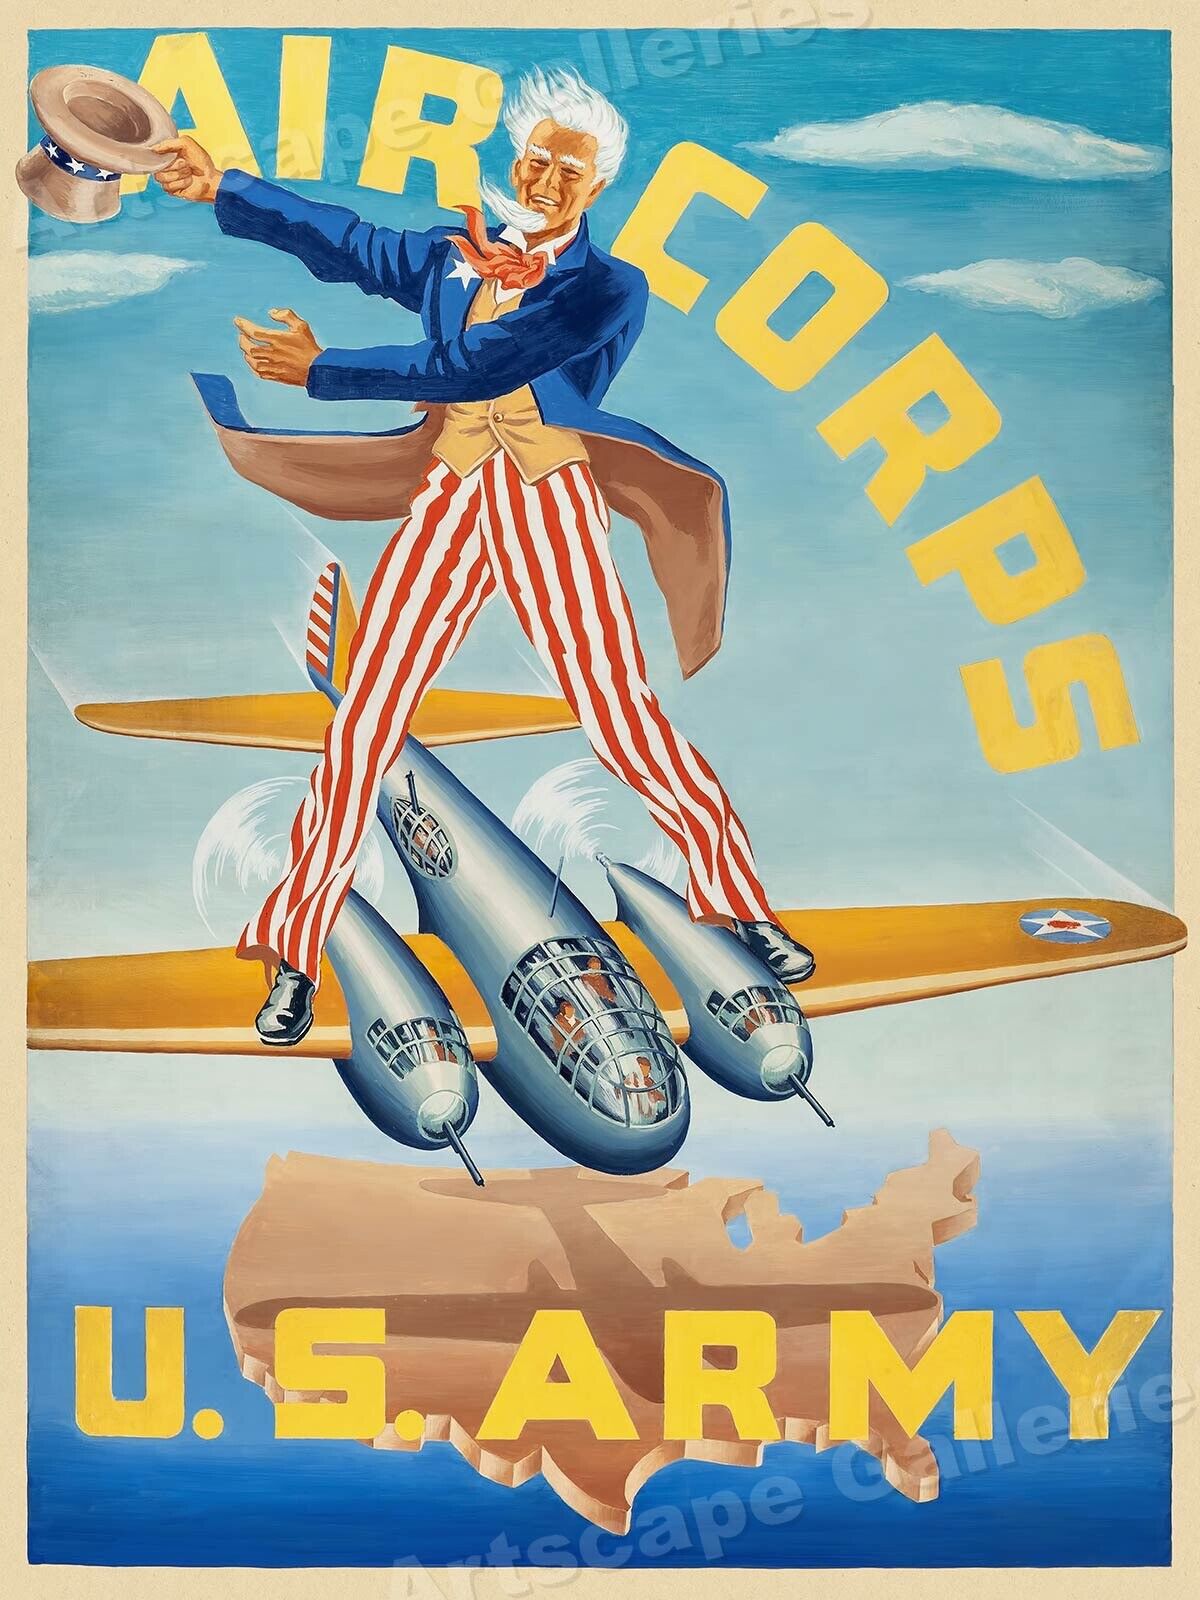 U.S. Army Air Corps Uncle Sam 1940s Vintage Style WWII Poster - 18x24